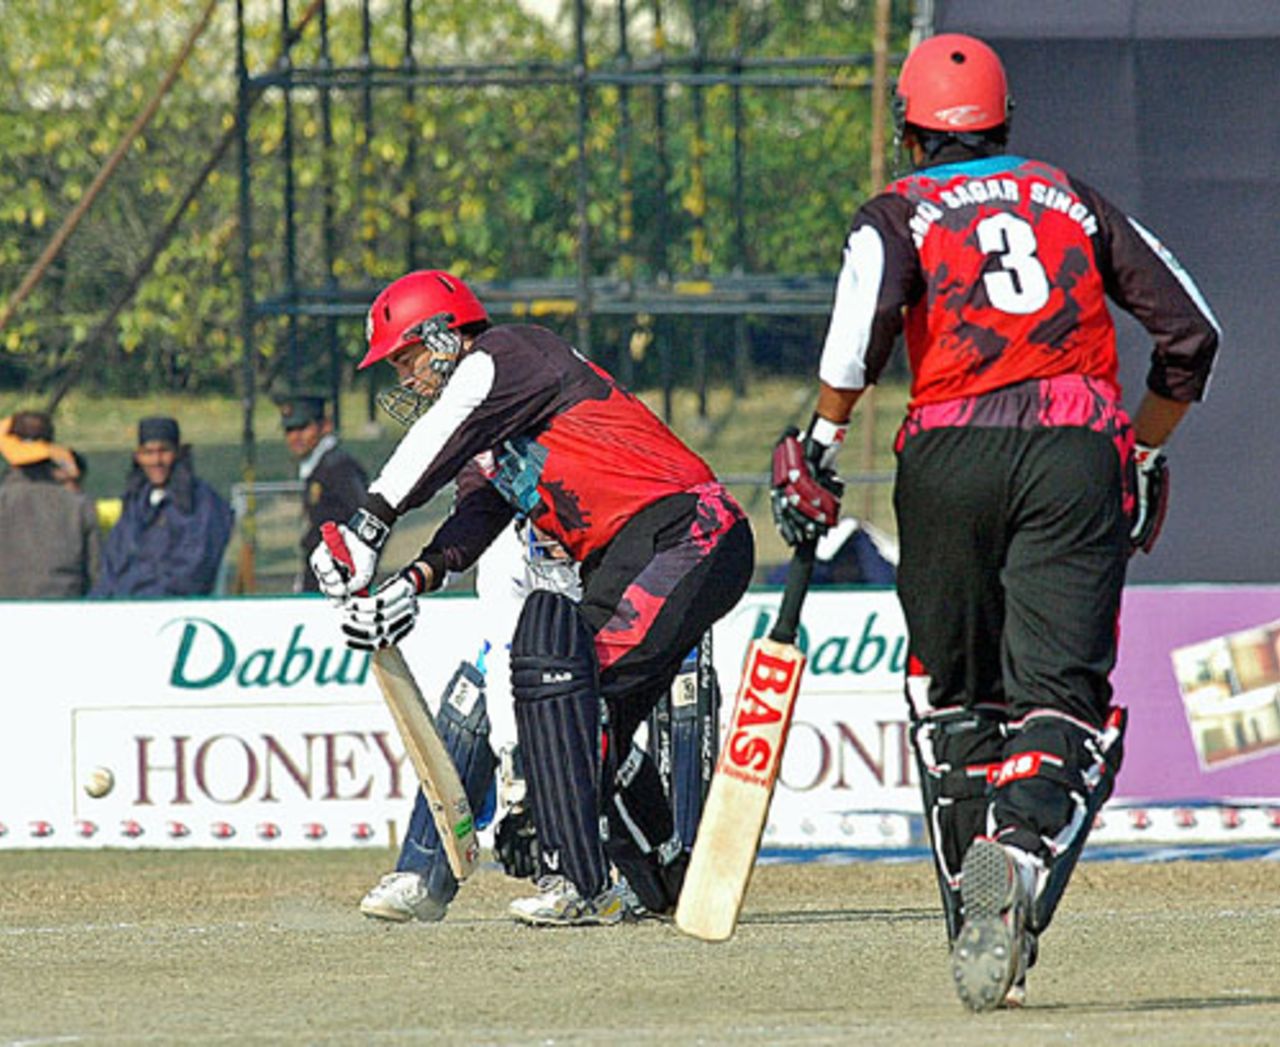 Craig McMillan works the ball to the off side during his 27, Delhi Jets v Kolkata Tigers, 3rd Place Playoff, Indian Cricket League, Panchkula, December 16, 2007 

